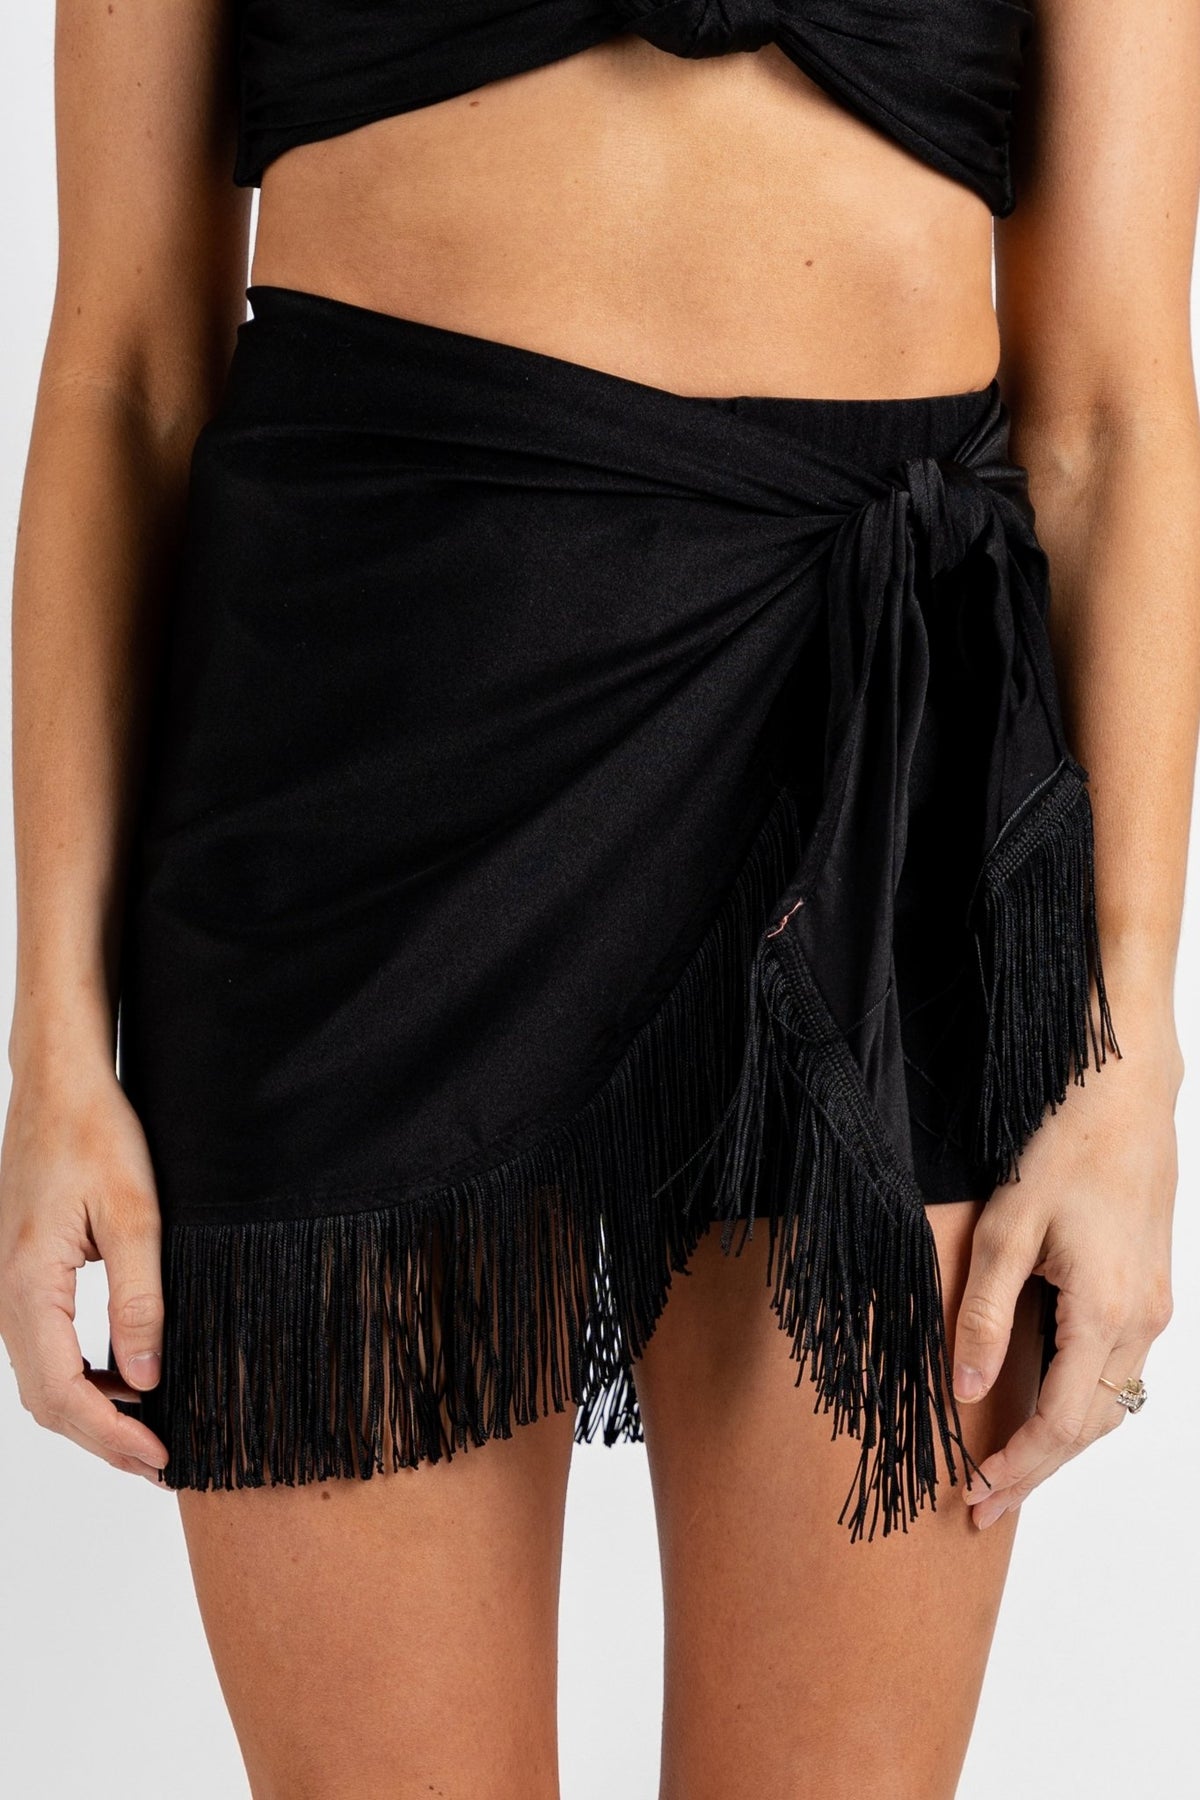 Knotted fringe wrap shorts black pearl - Cute shorts - Trendy Shorts at Lush Fashion Lounge Boutique in Oklahoma City